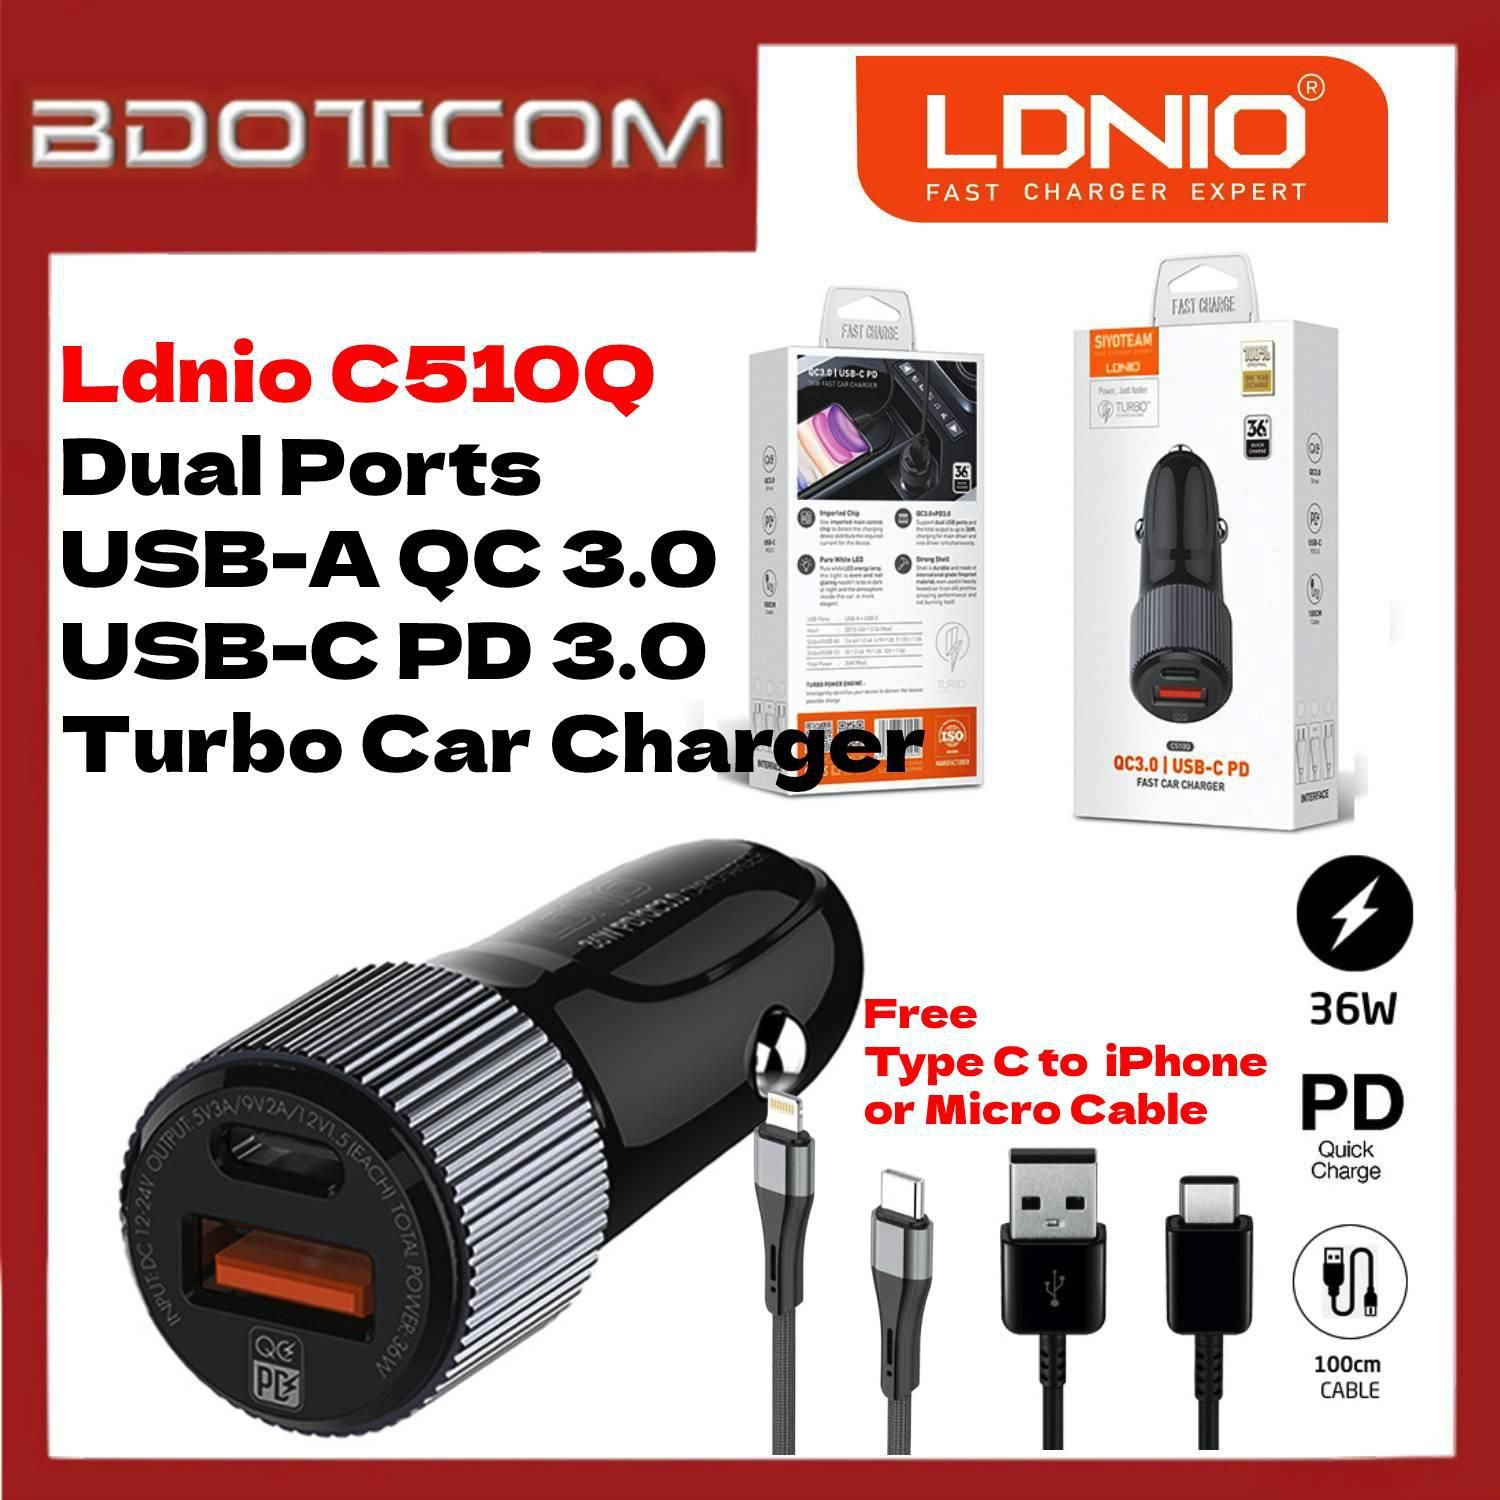 LDNIO C510Q Dual Port Turbo Car Charger - PD 3.0 and QC3.0 - 36W Max